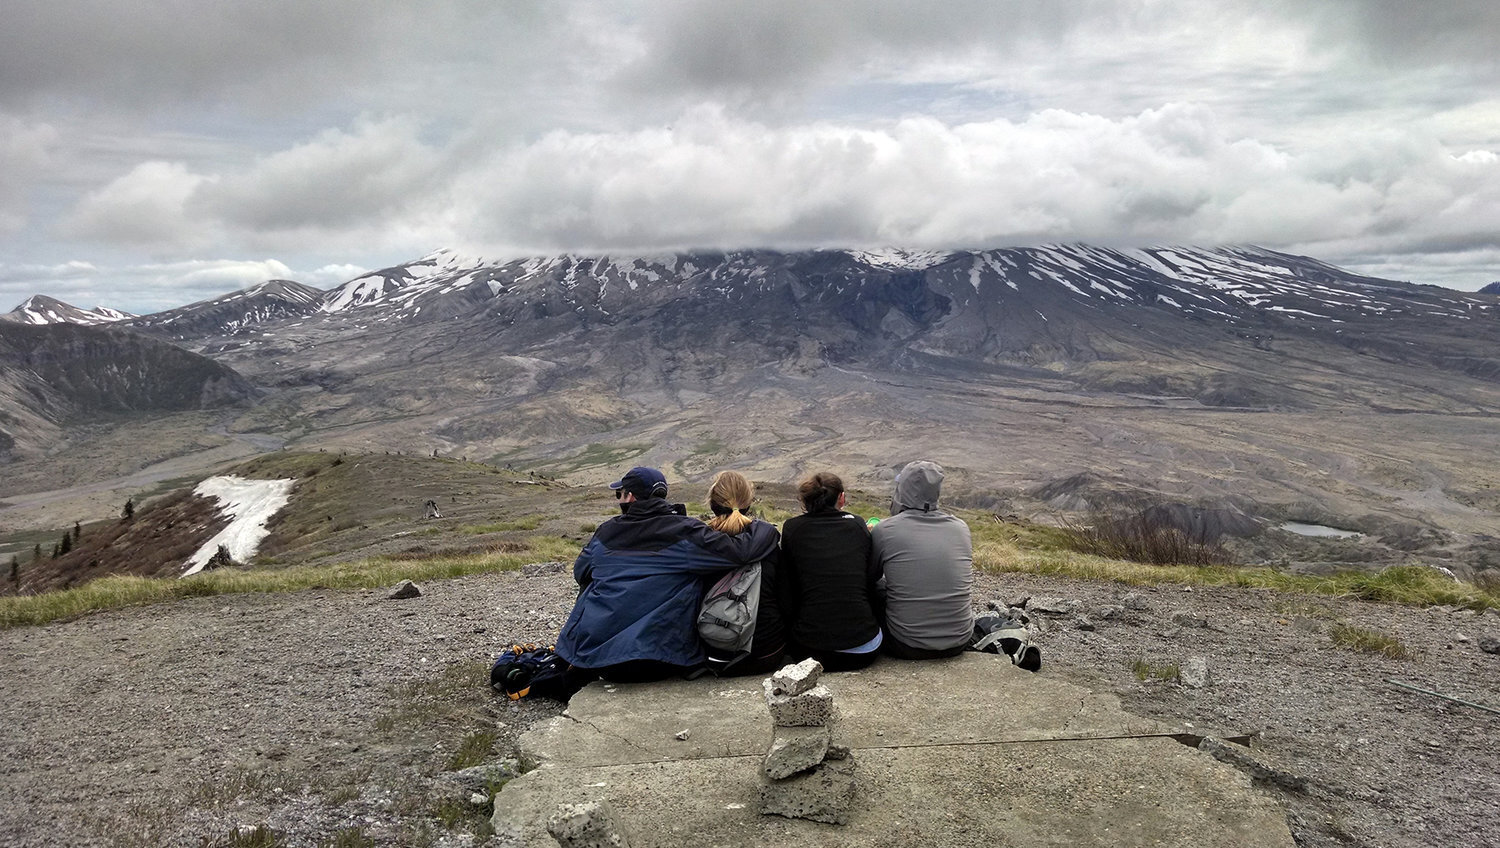 Hikers take in a picturesque scene along a trail in the Mount St. Helens blast zone in this file photo.